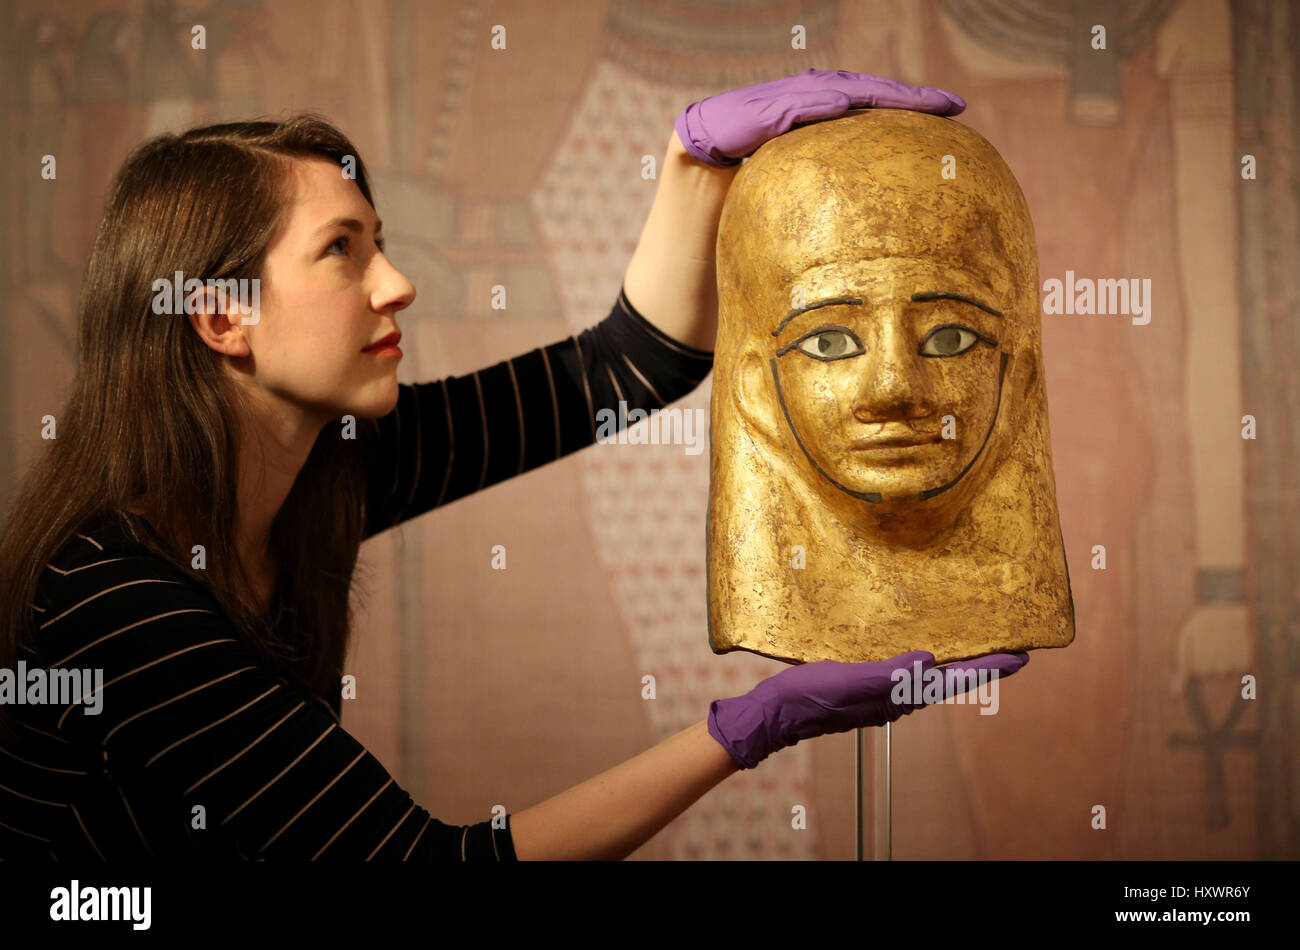 Senior curator Dr Margaret Maitland takes a closer look at the gold mummy-mask of Montsref which is on display in The Tomb: Ancient Egyptian Burial exhibition at the National Museum of Scotland in Edinburgh. Stock Photo